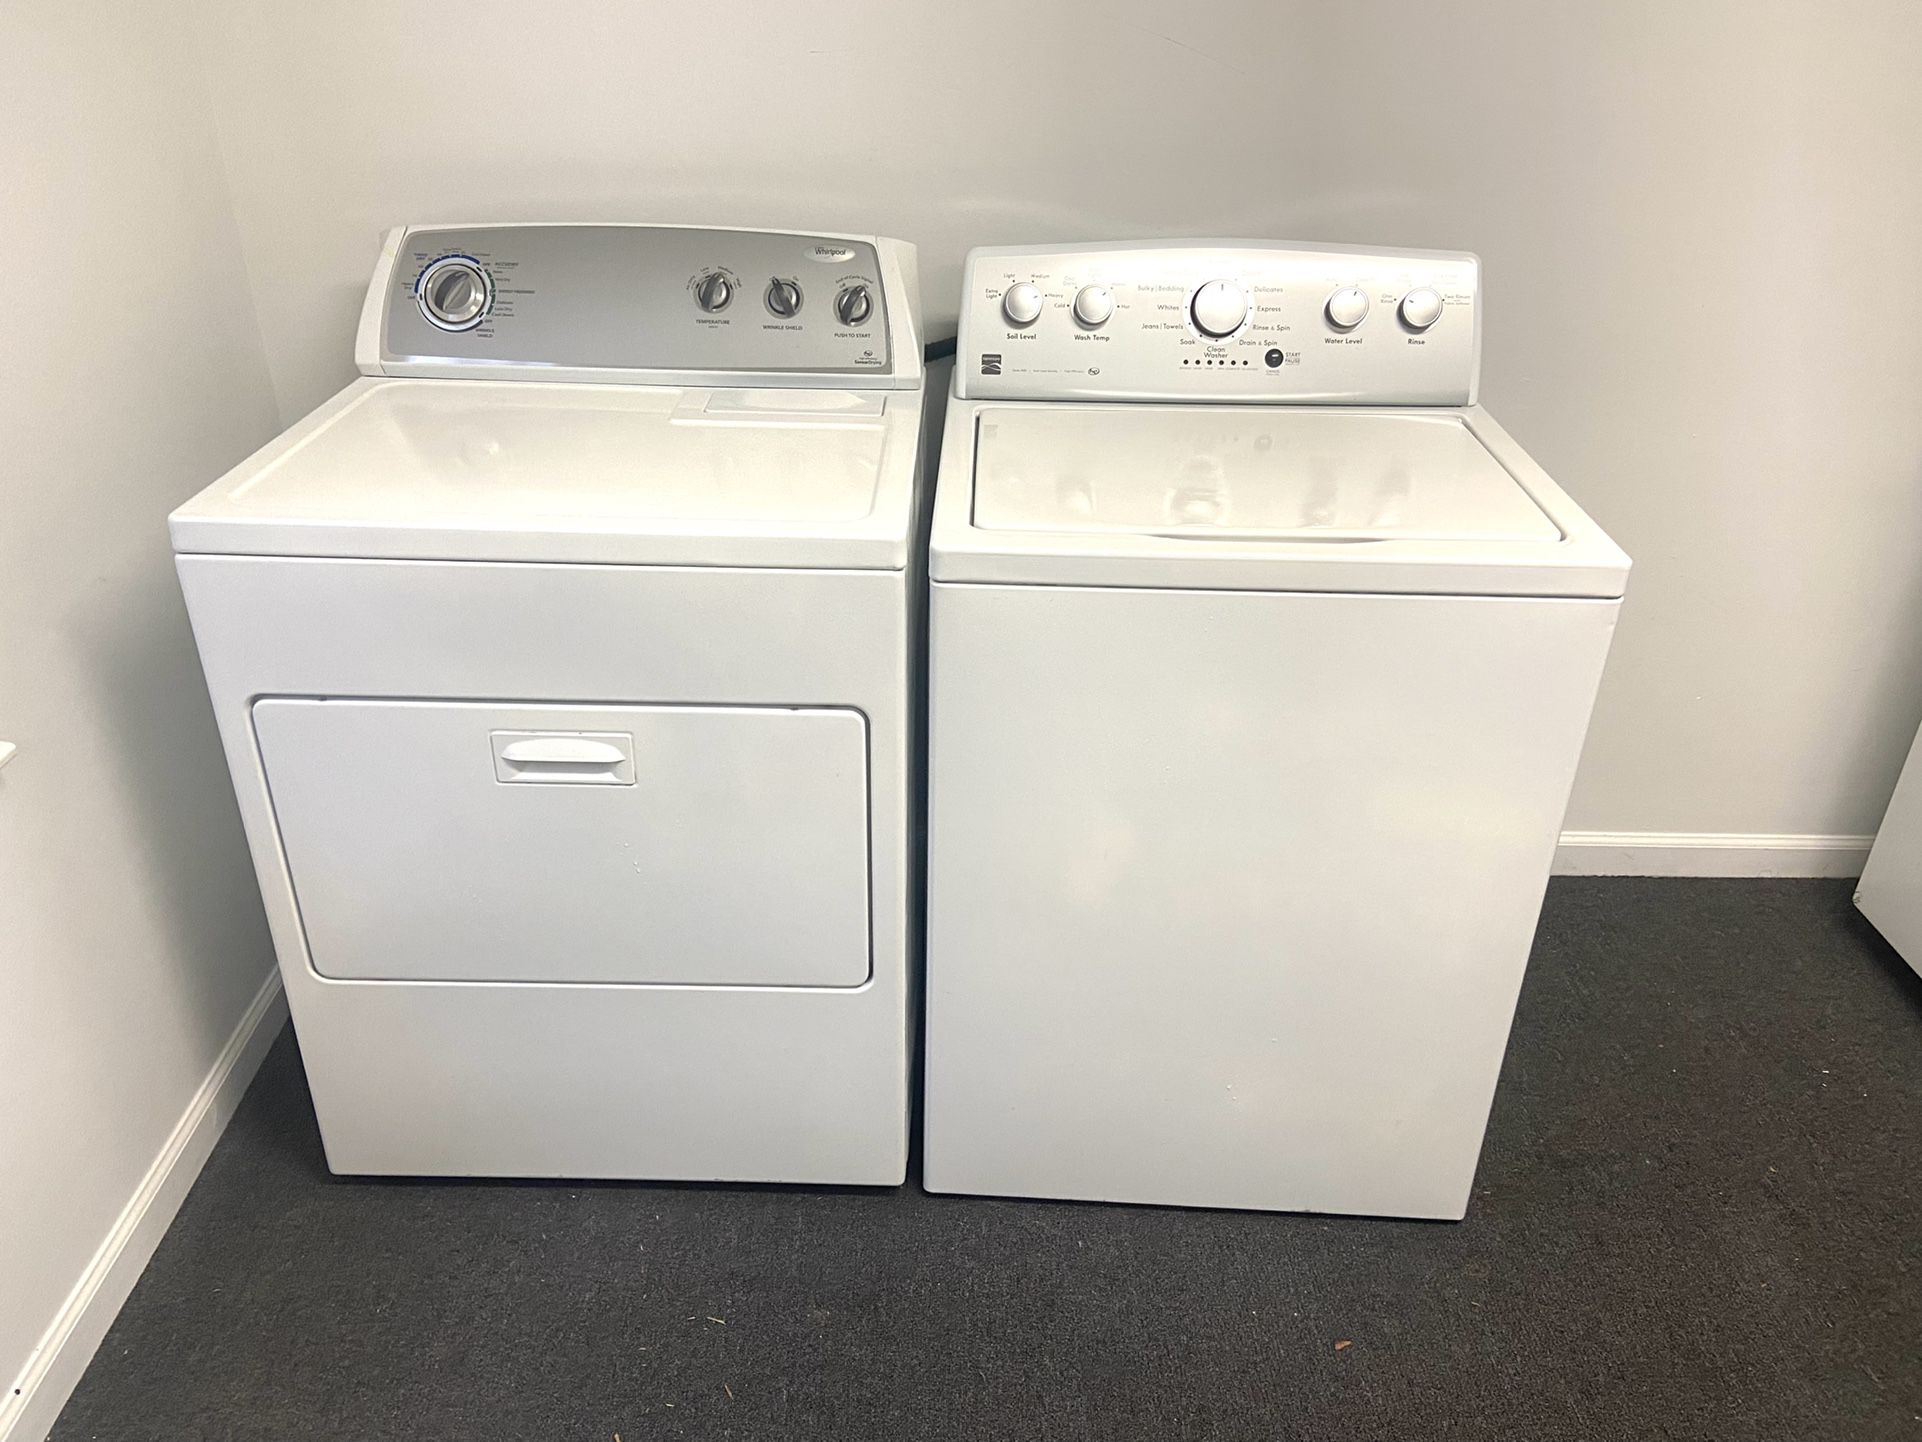 💥Quality and Affordable Large Electric Kenmore Washer And Whirlpool Dryer $350💥💥